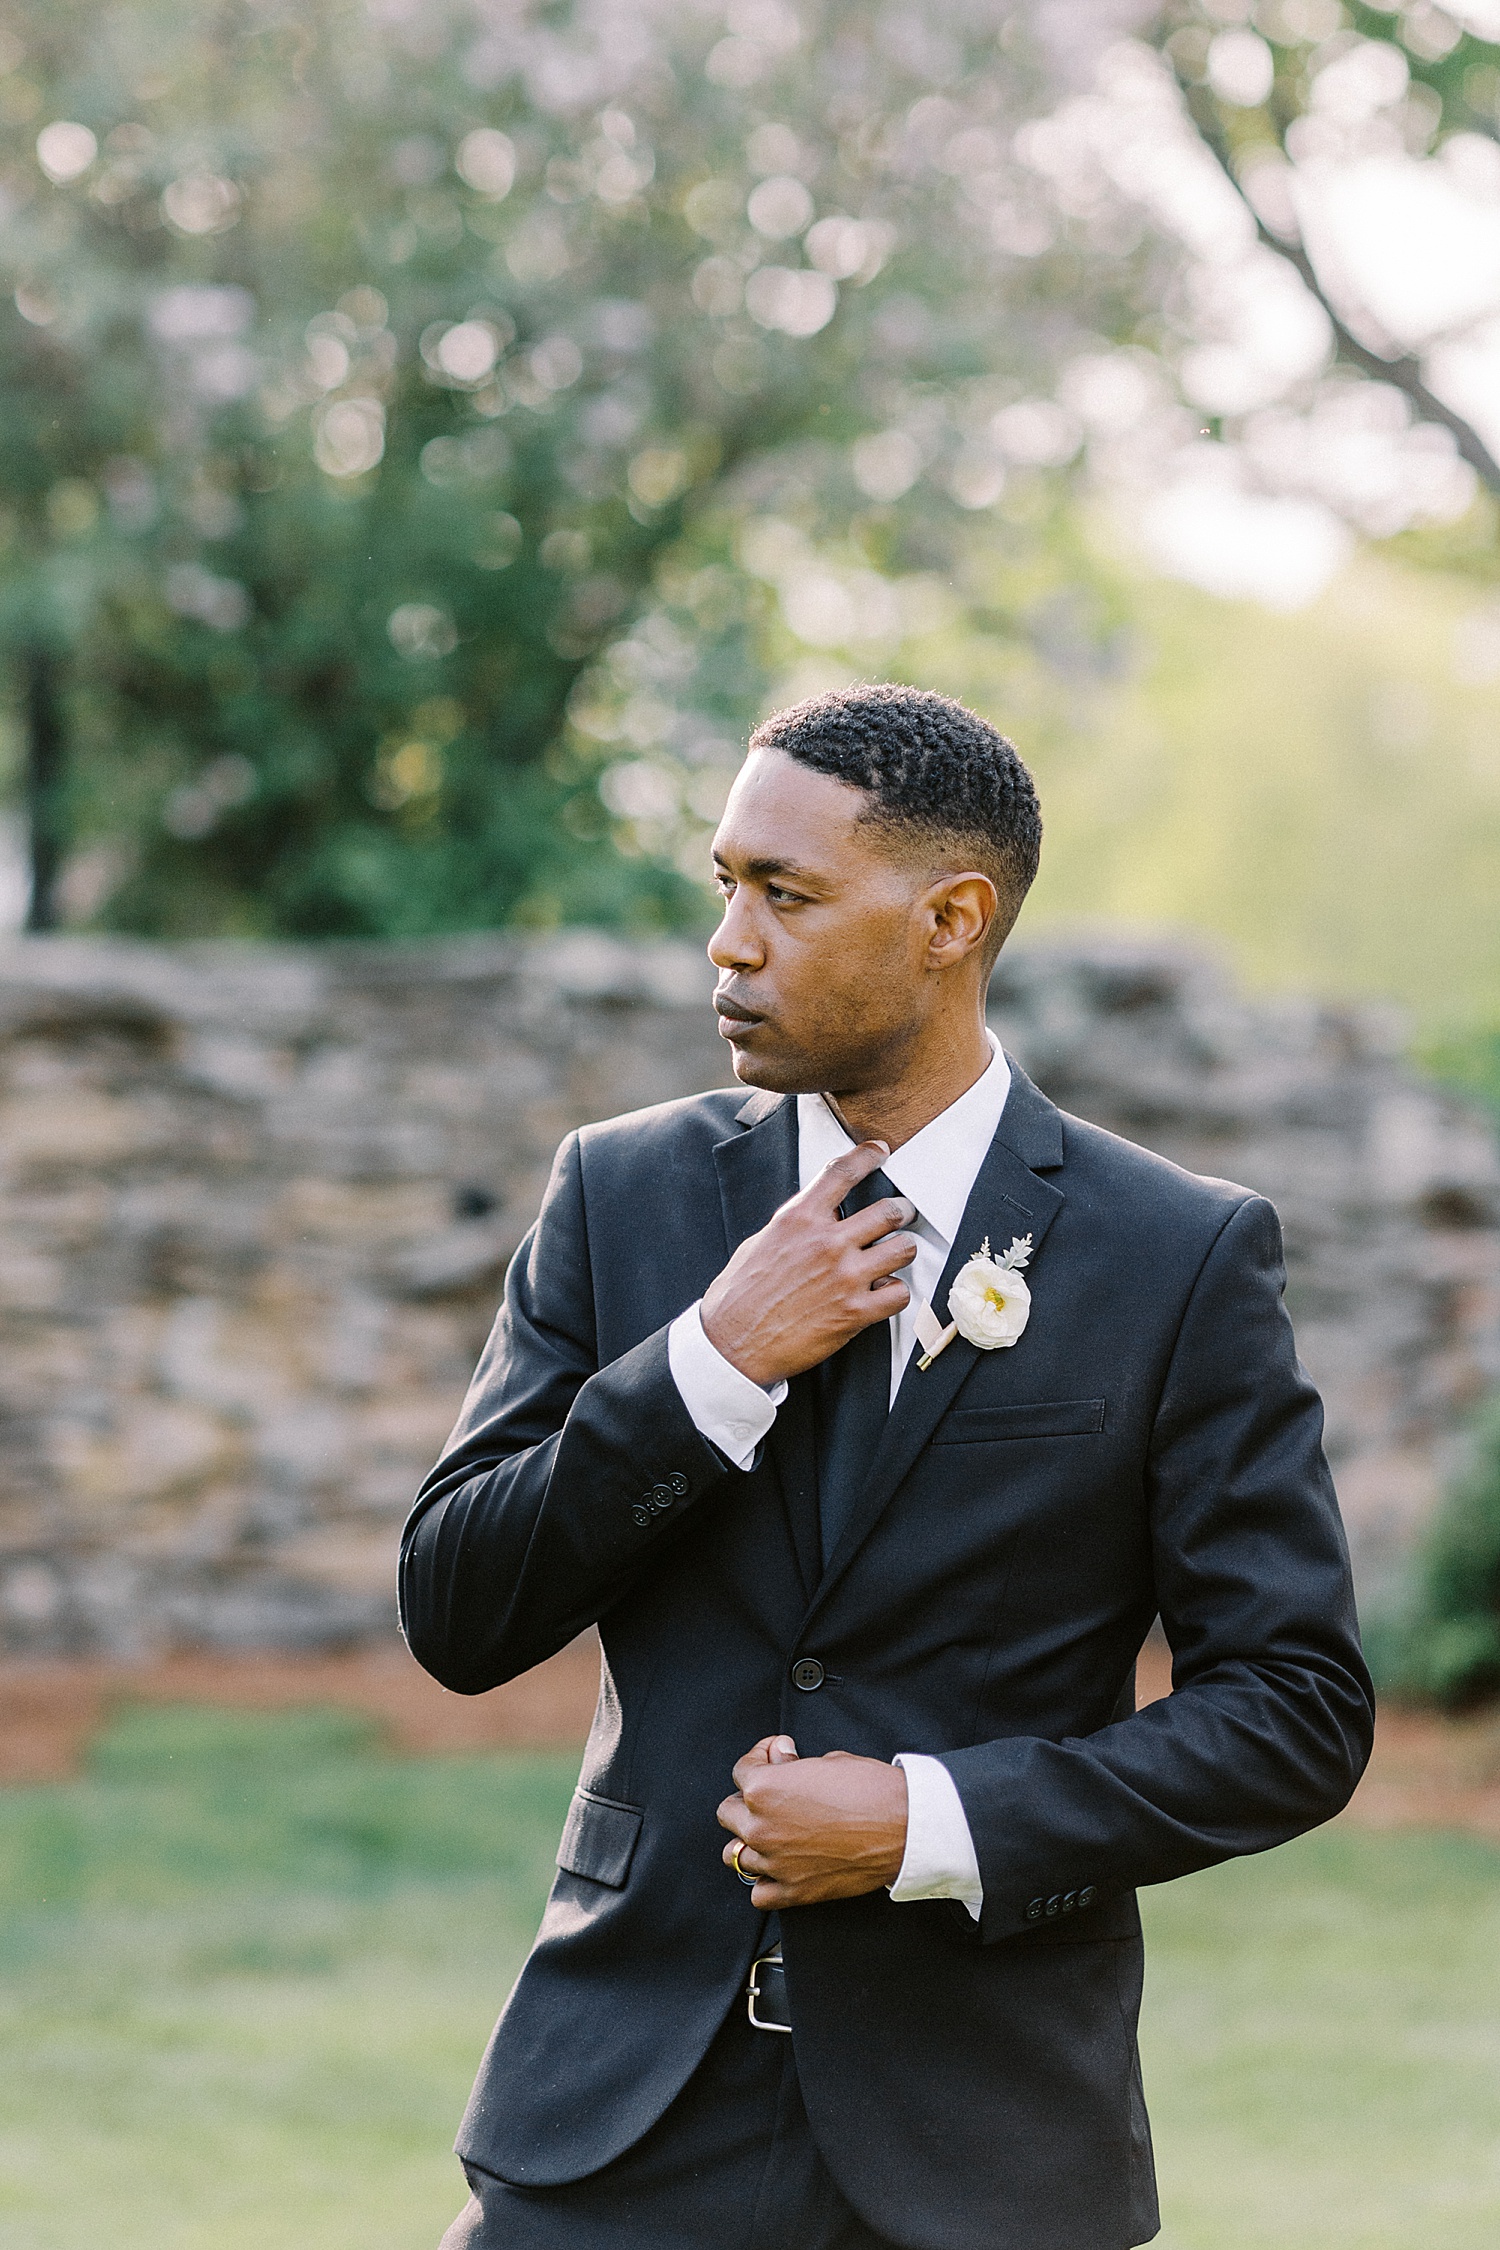 Groom in black suit outdoors by New York Photographer